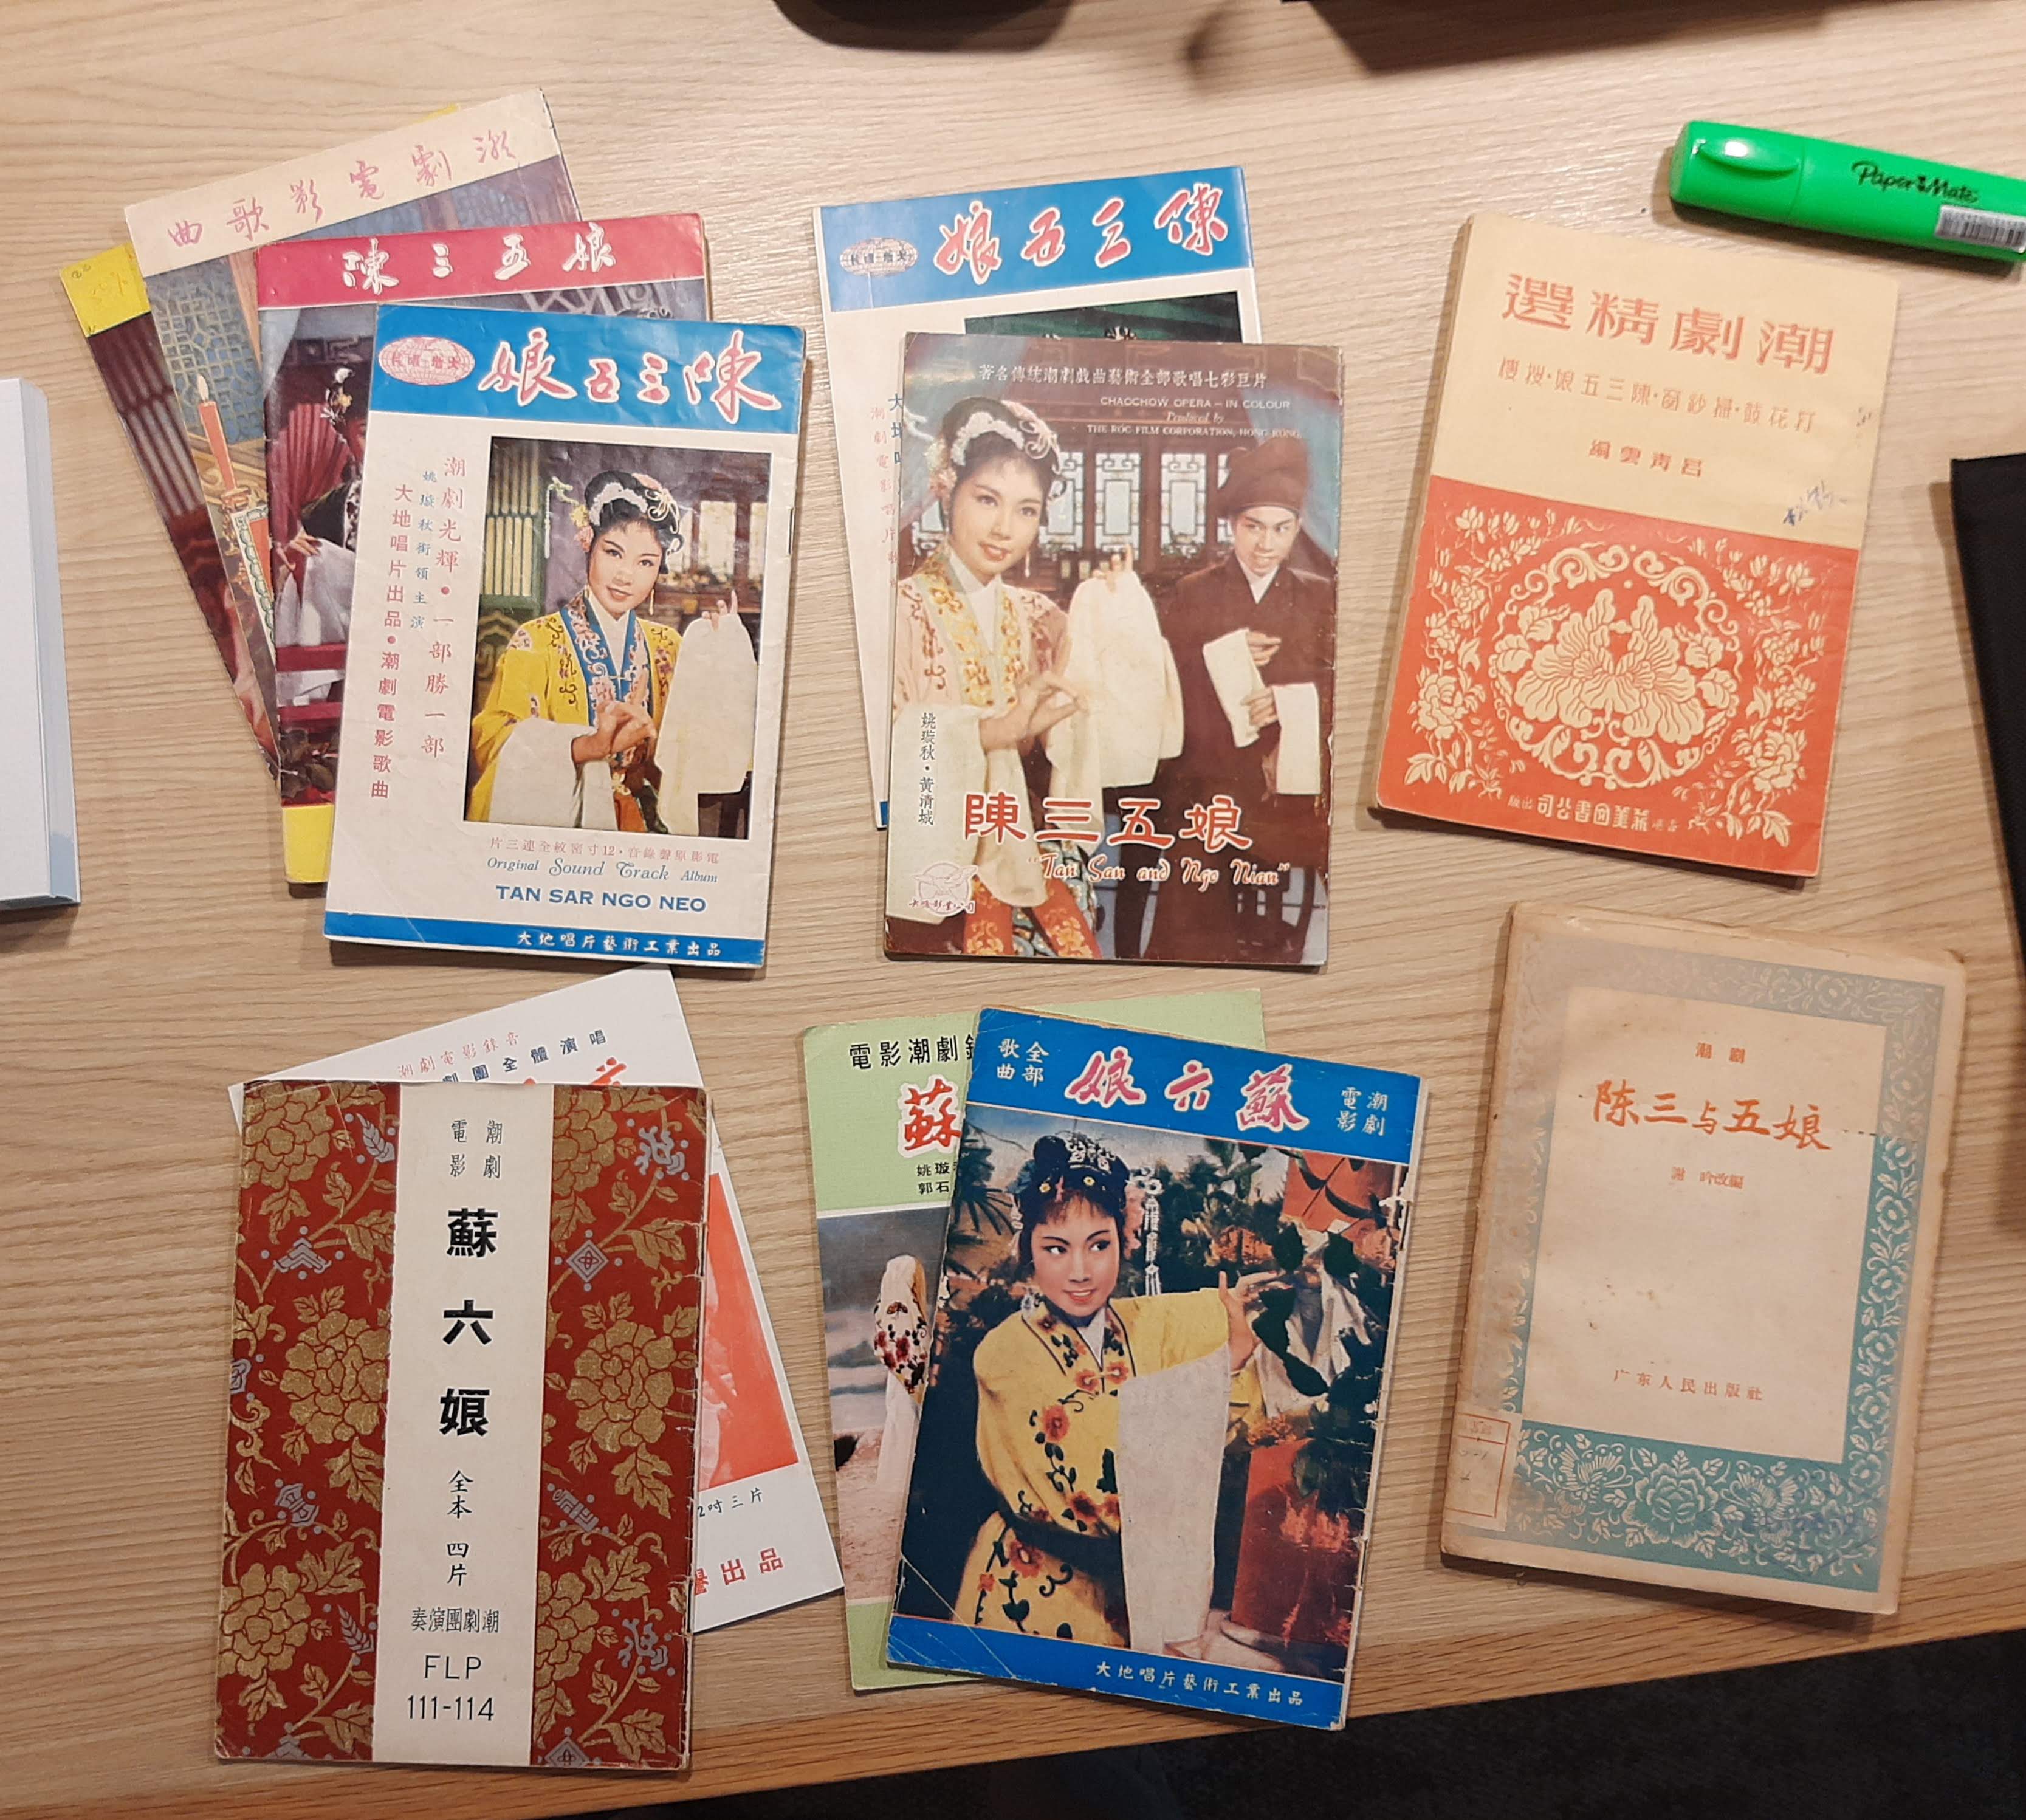 Commemorative booklets with scripts of movie productions of Teochew operas, colorful covers, some with pictures of the opera stars